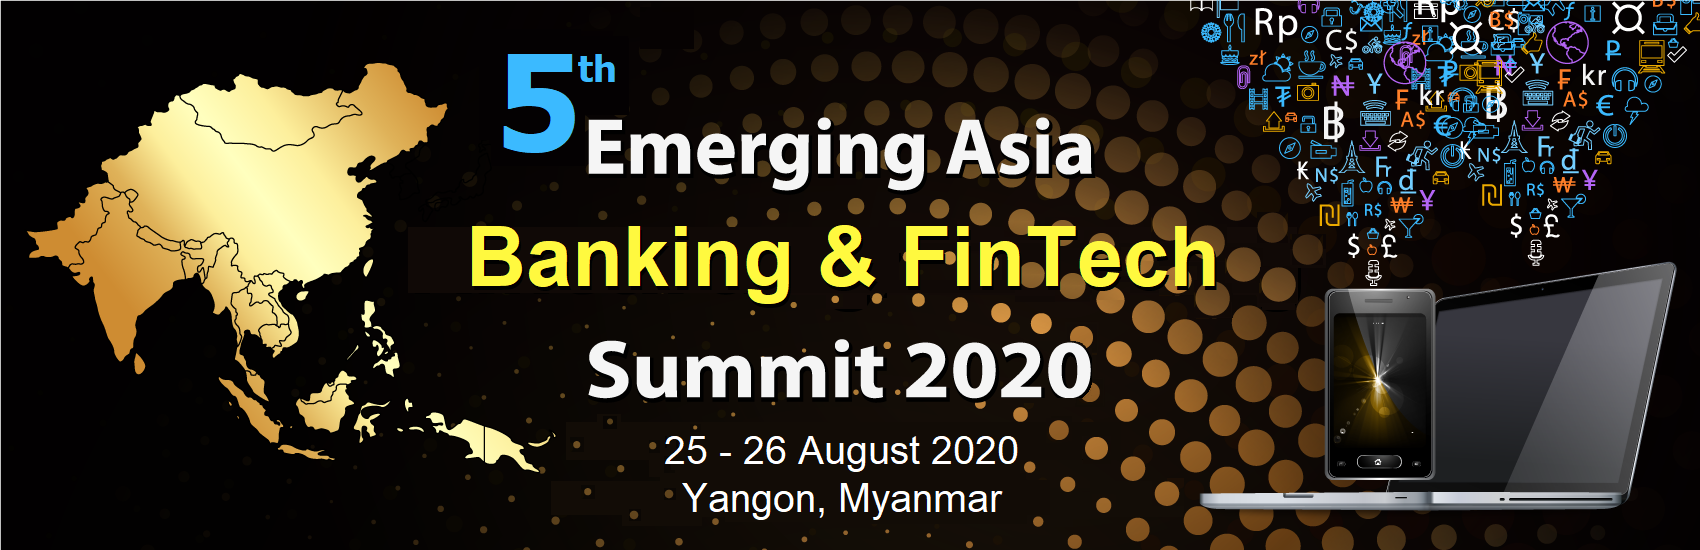 5th Emerging Asia Banking & FinTech Summit 2020 organized by Magenta Global Pte Ltd